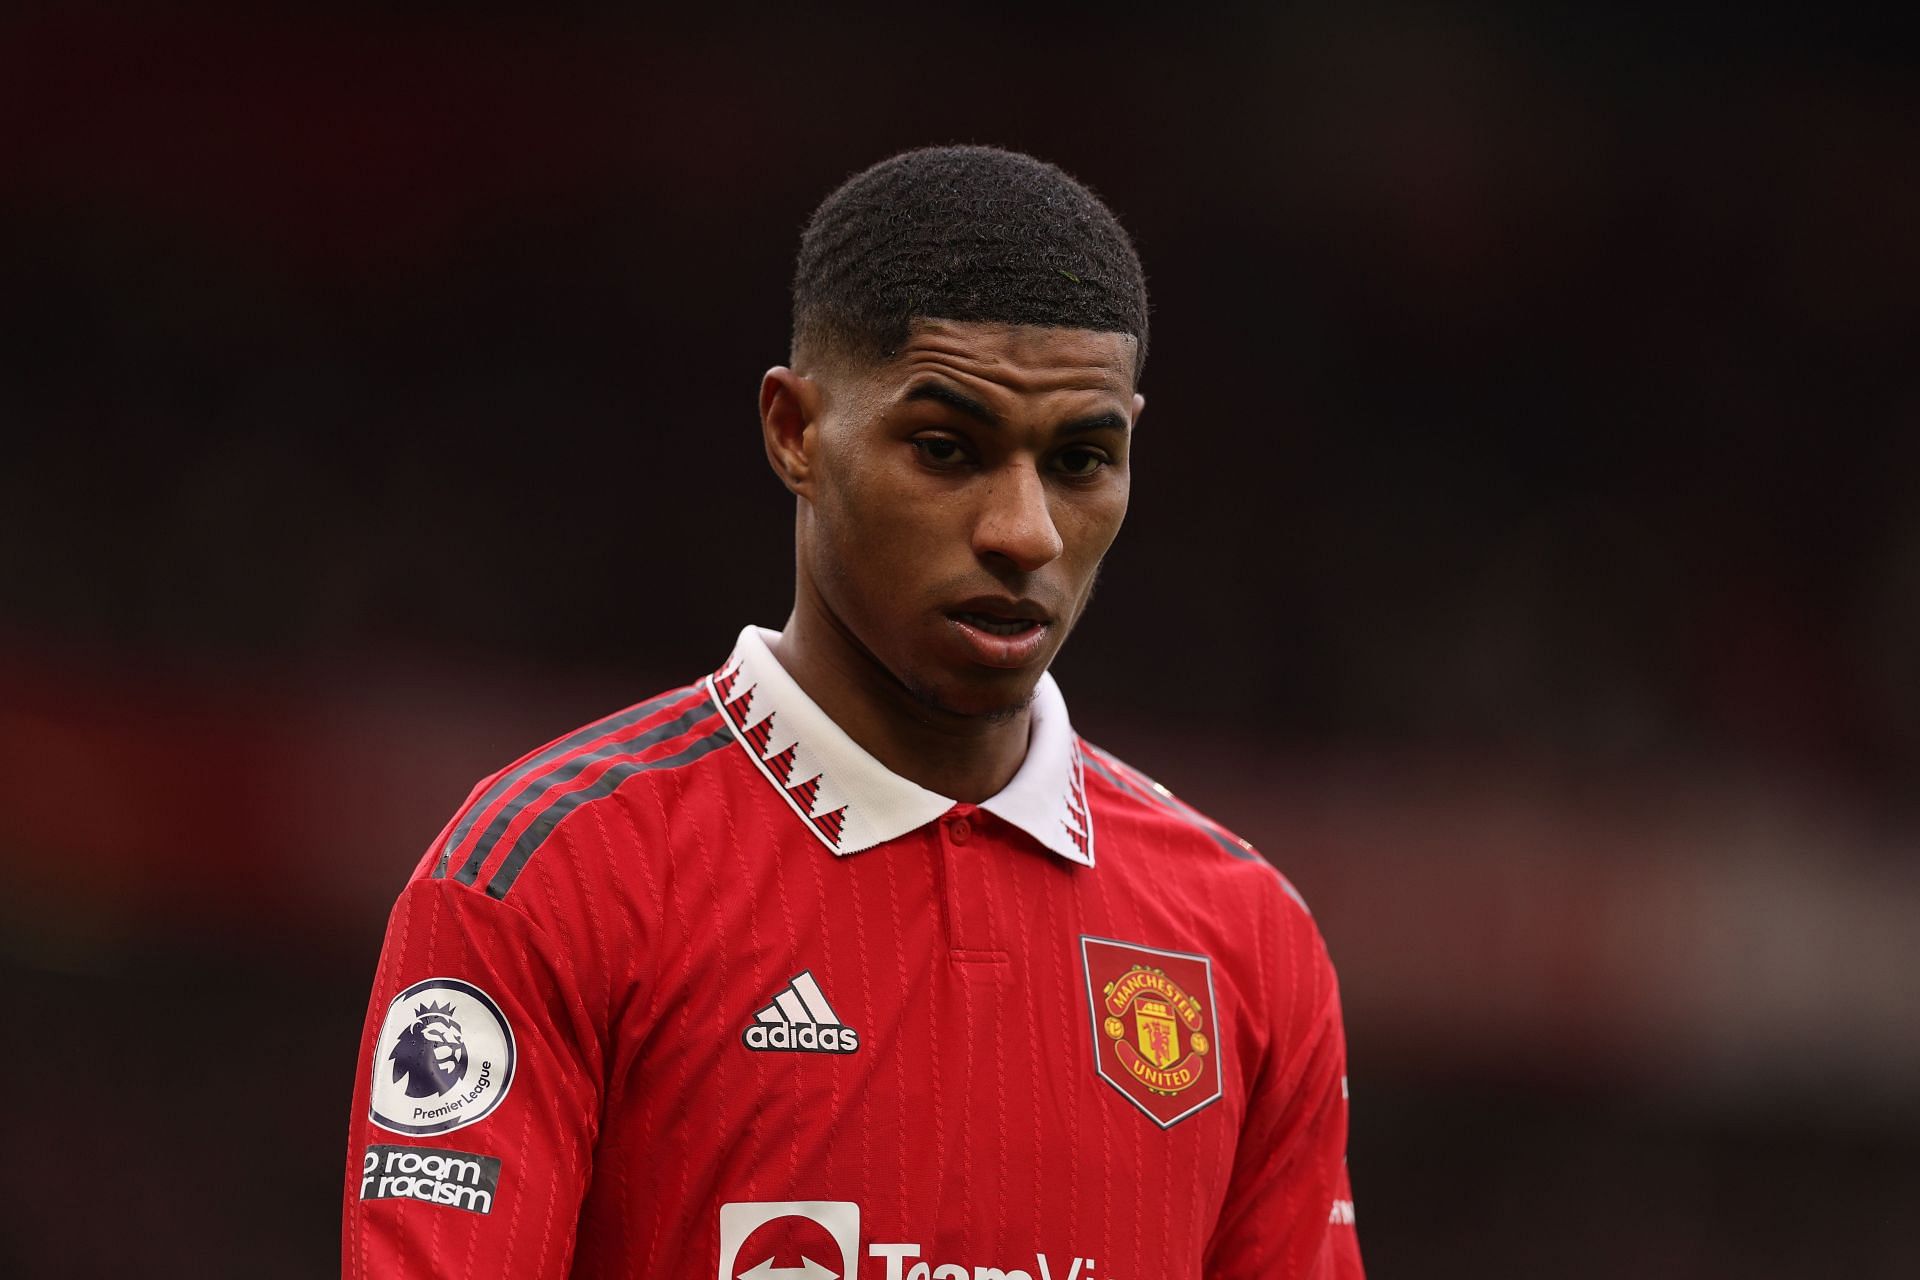 Marcus Rashford is a doubt to play the Carabao Cup final against Newcastle United.